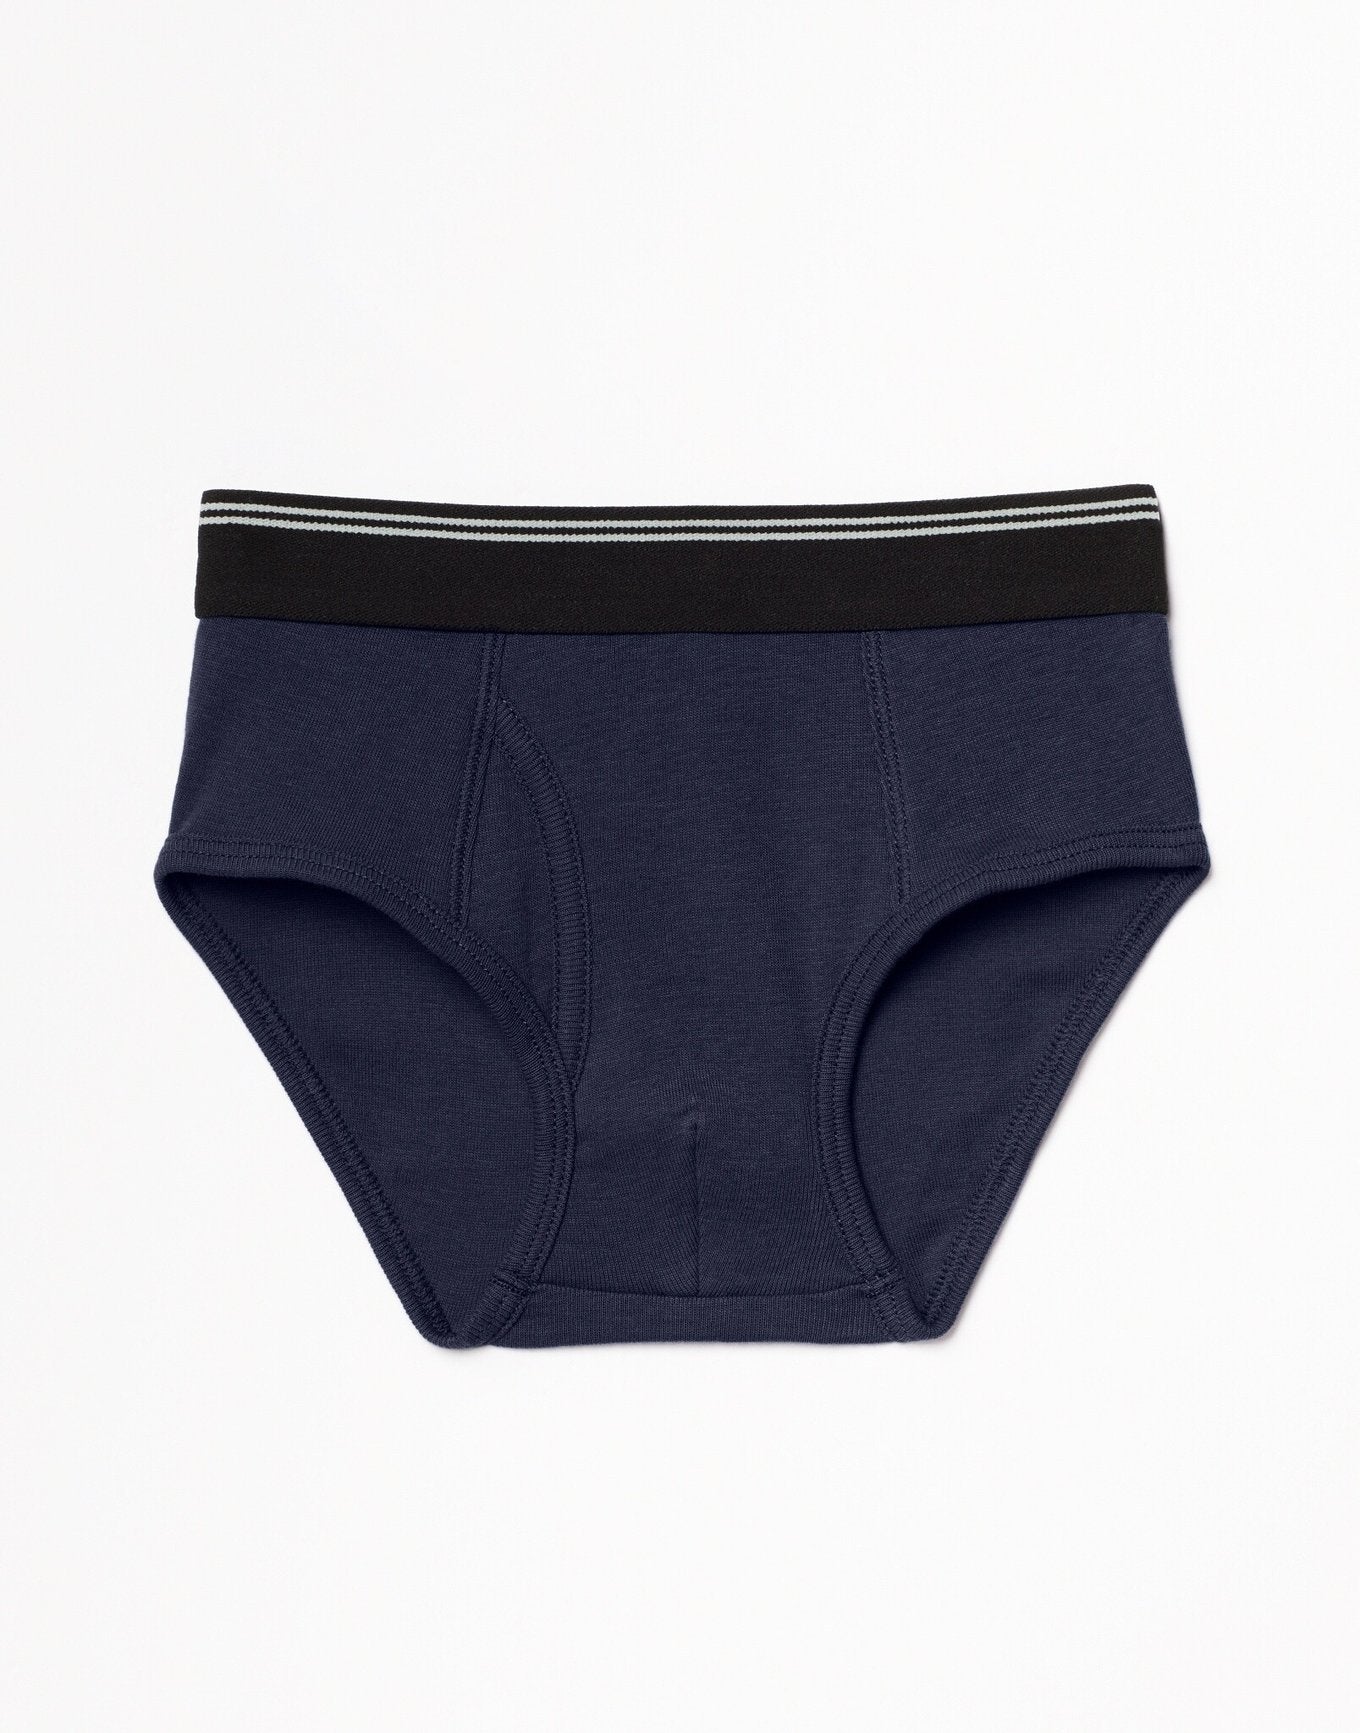 Outlines Kids Lucas in color Maritime Blue and shape brief